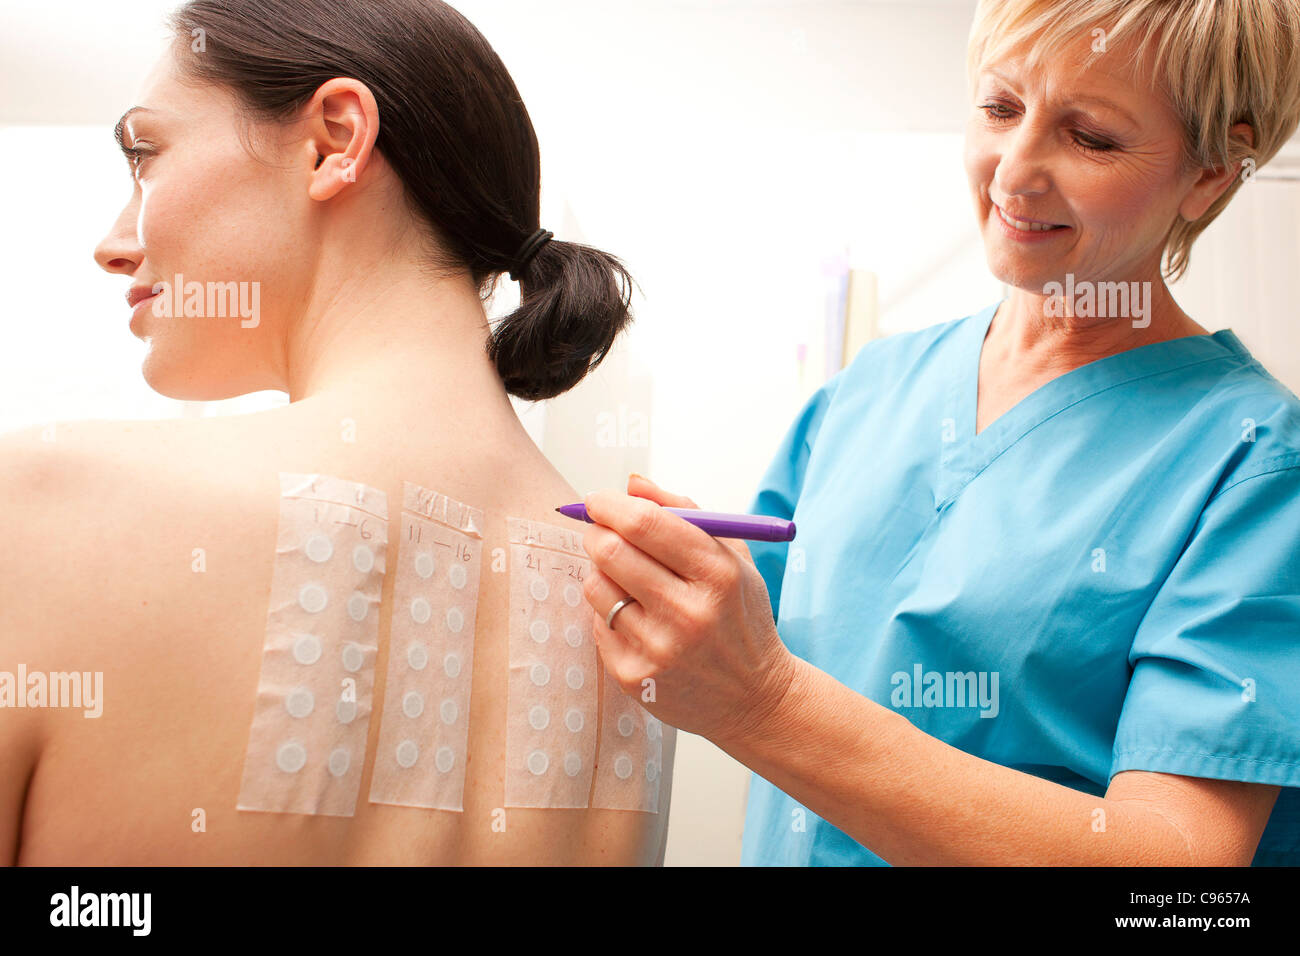 Allergia patch test. Foto Stock